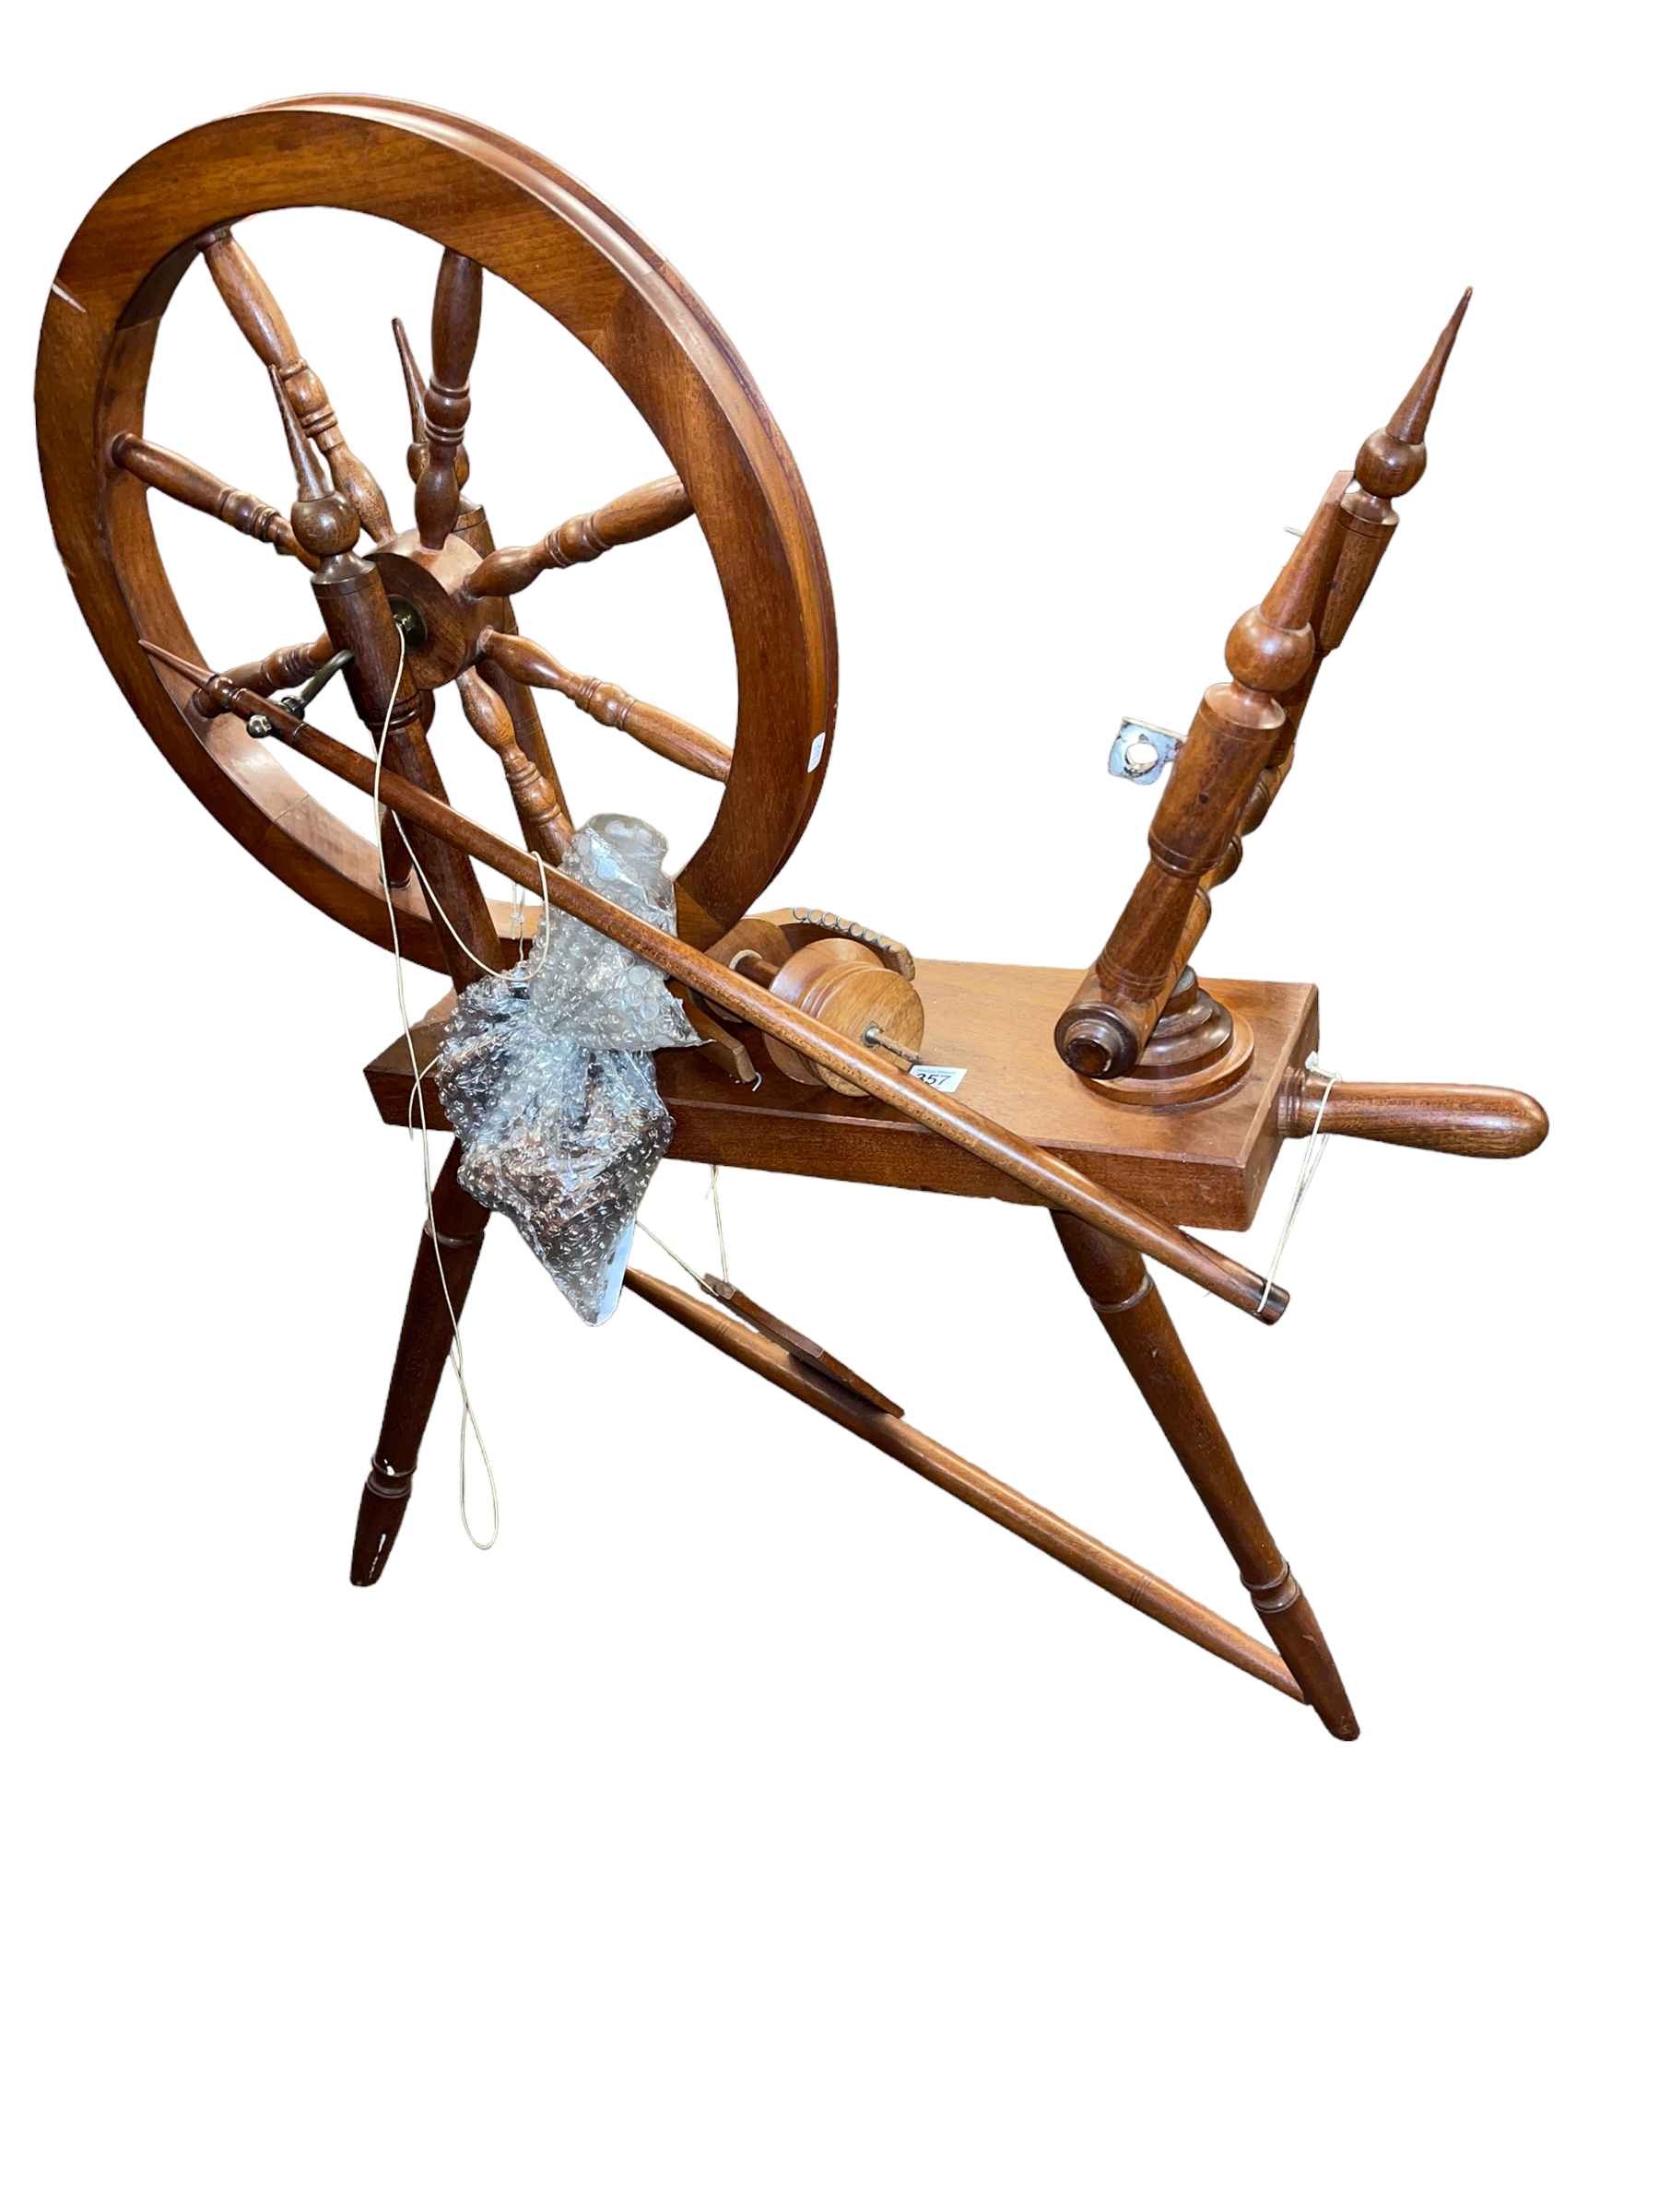 Spinning wheel and wool winding frame (2).